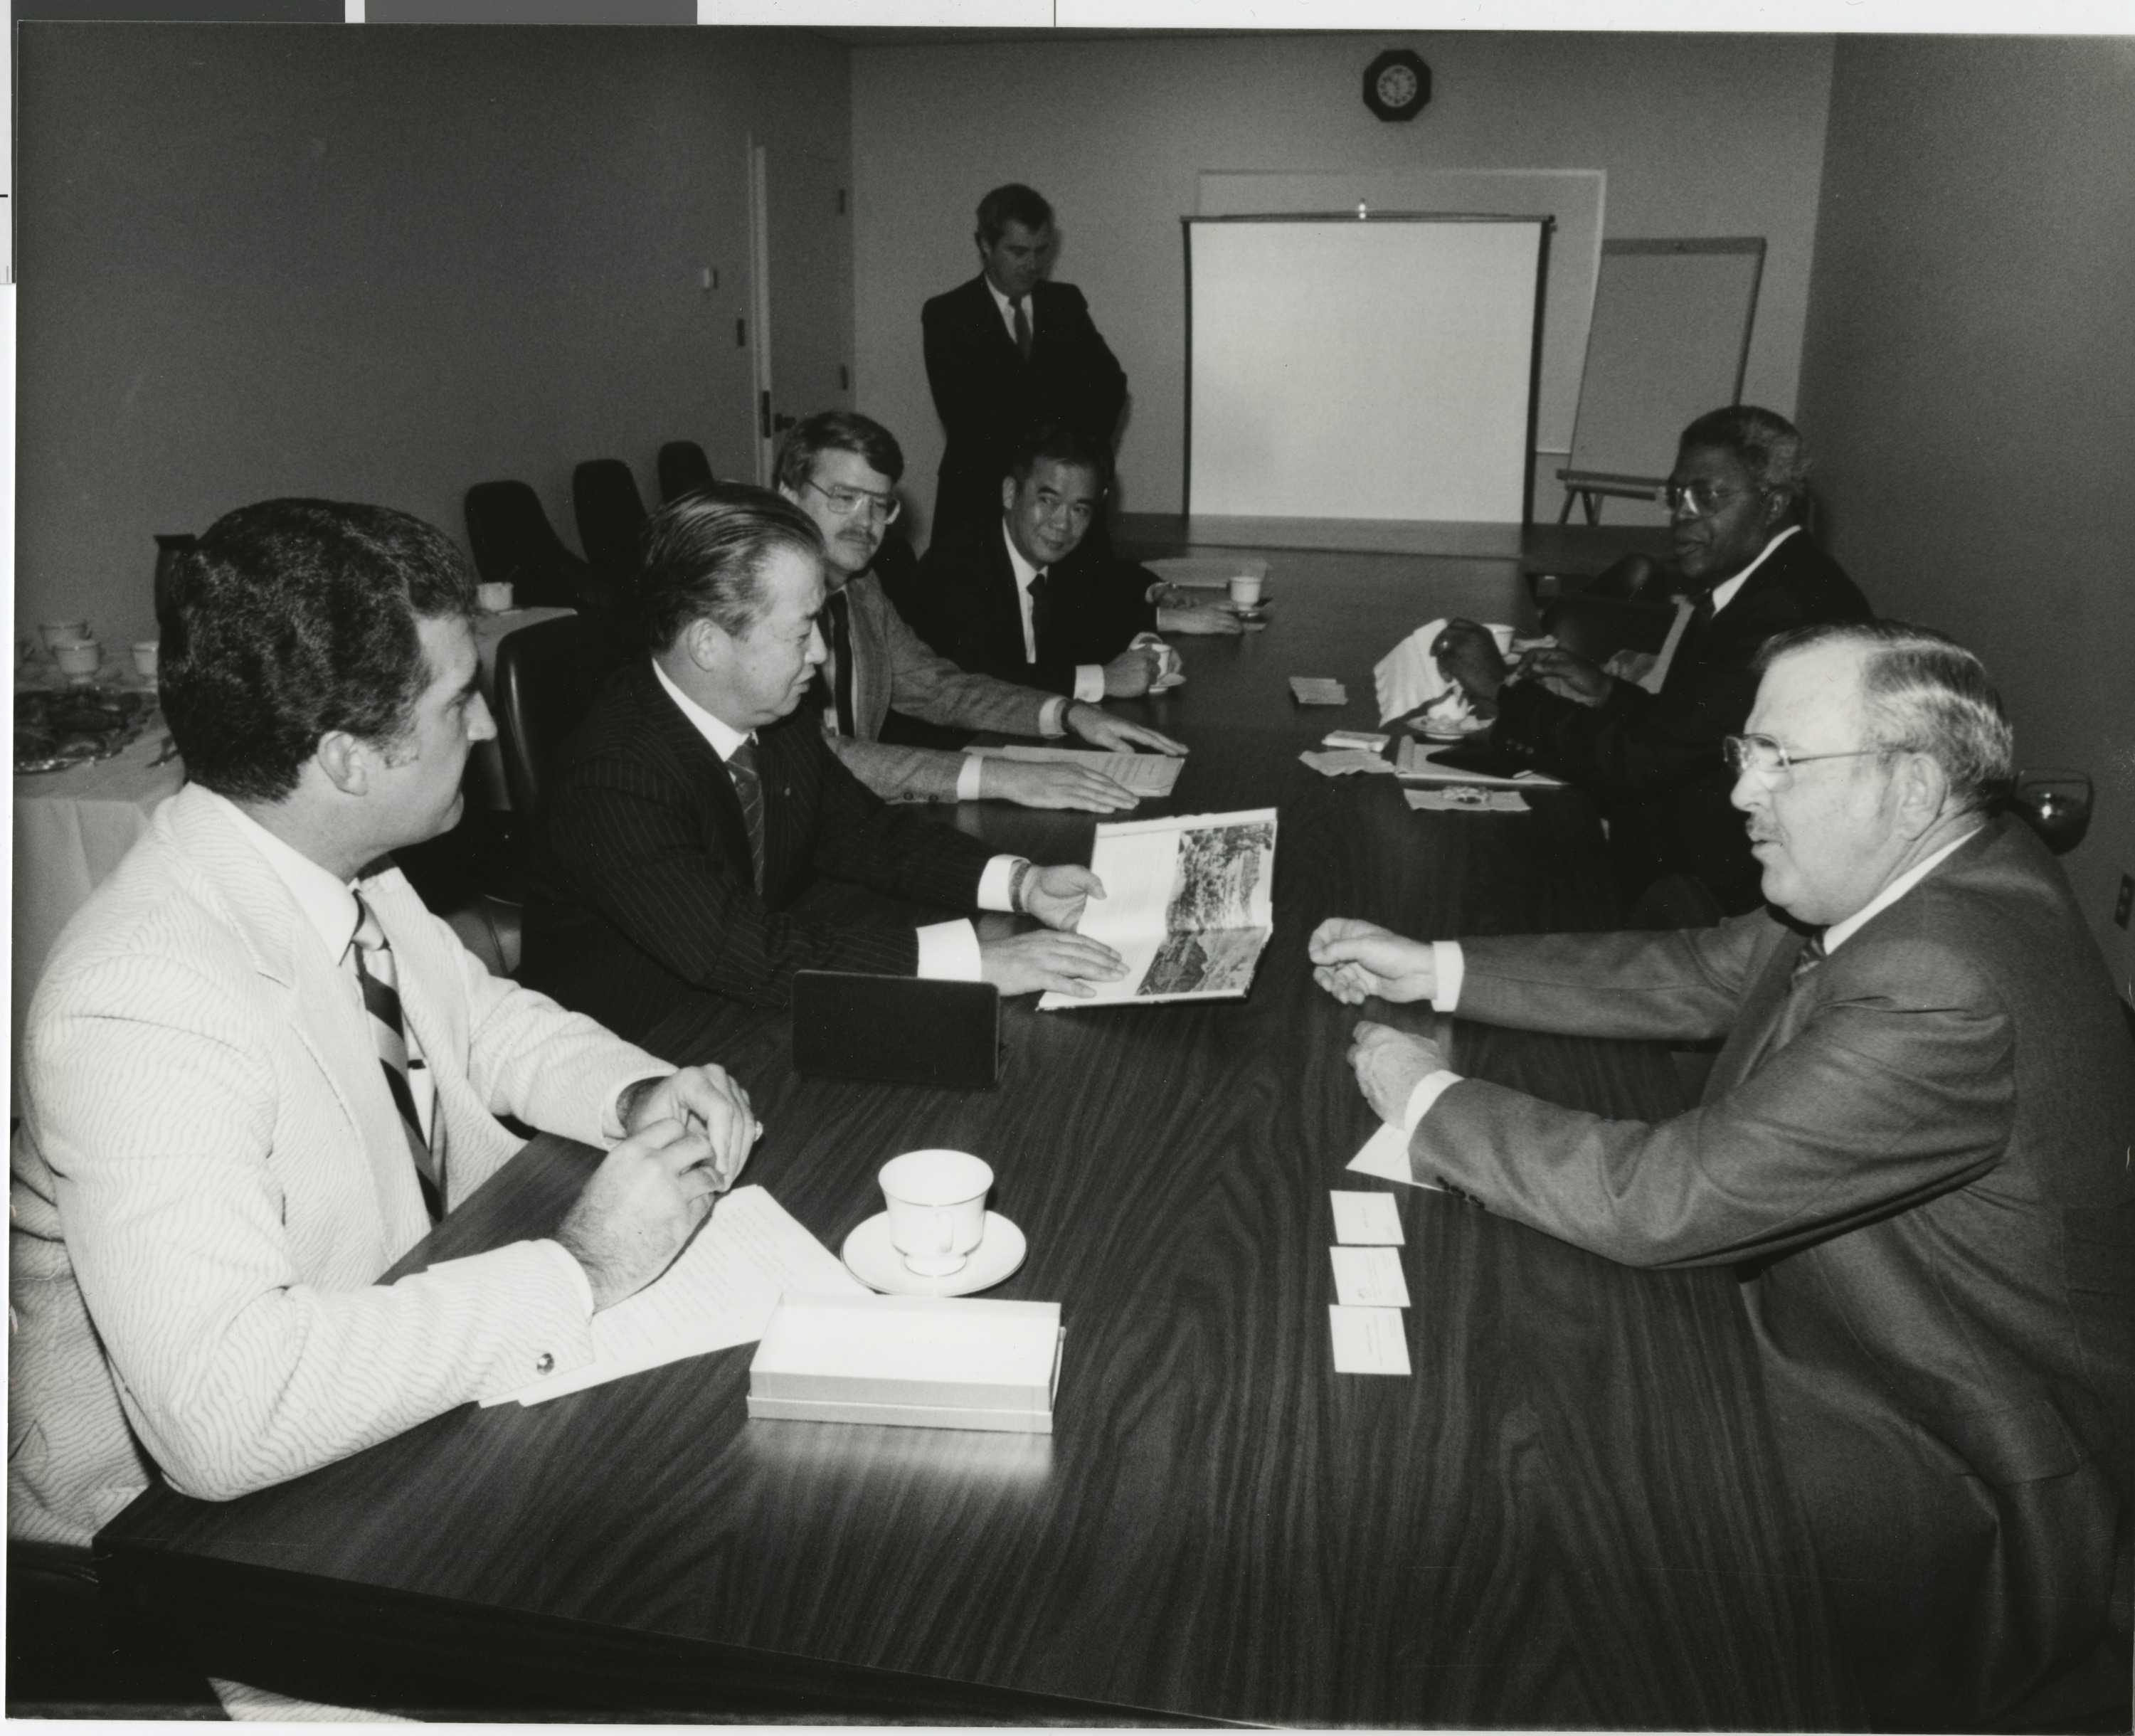 Photograph of Ron Lurie with Japanese officials, October 1, 1982